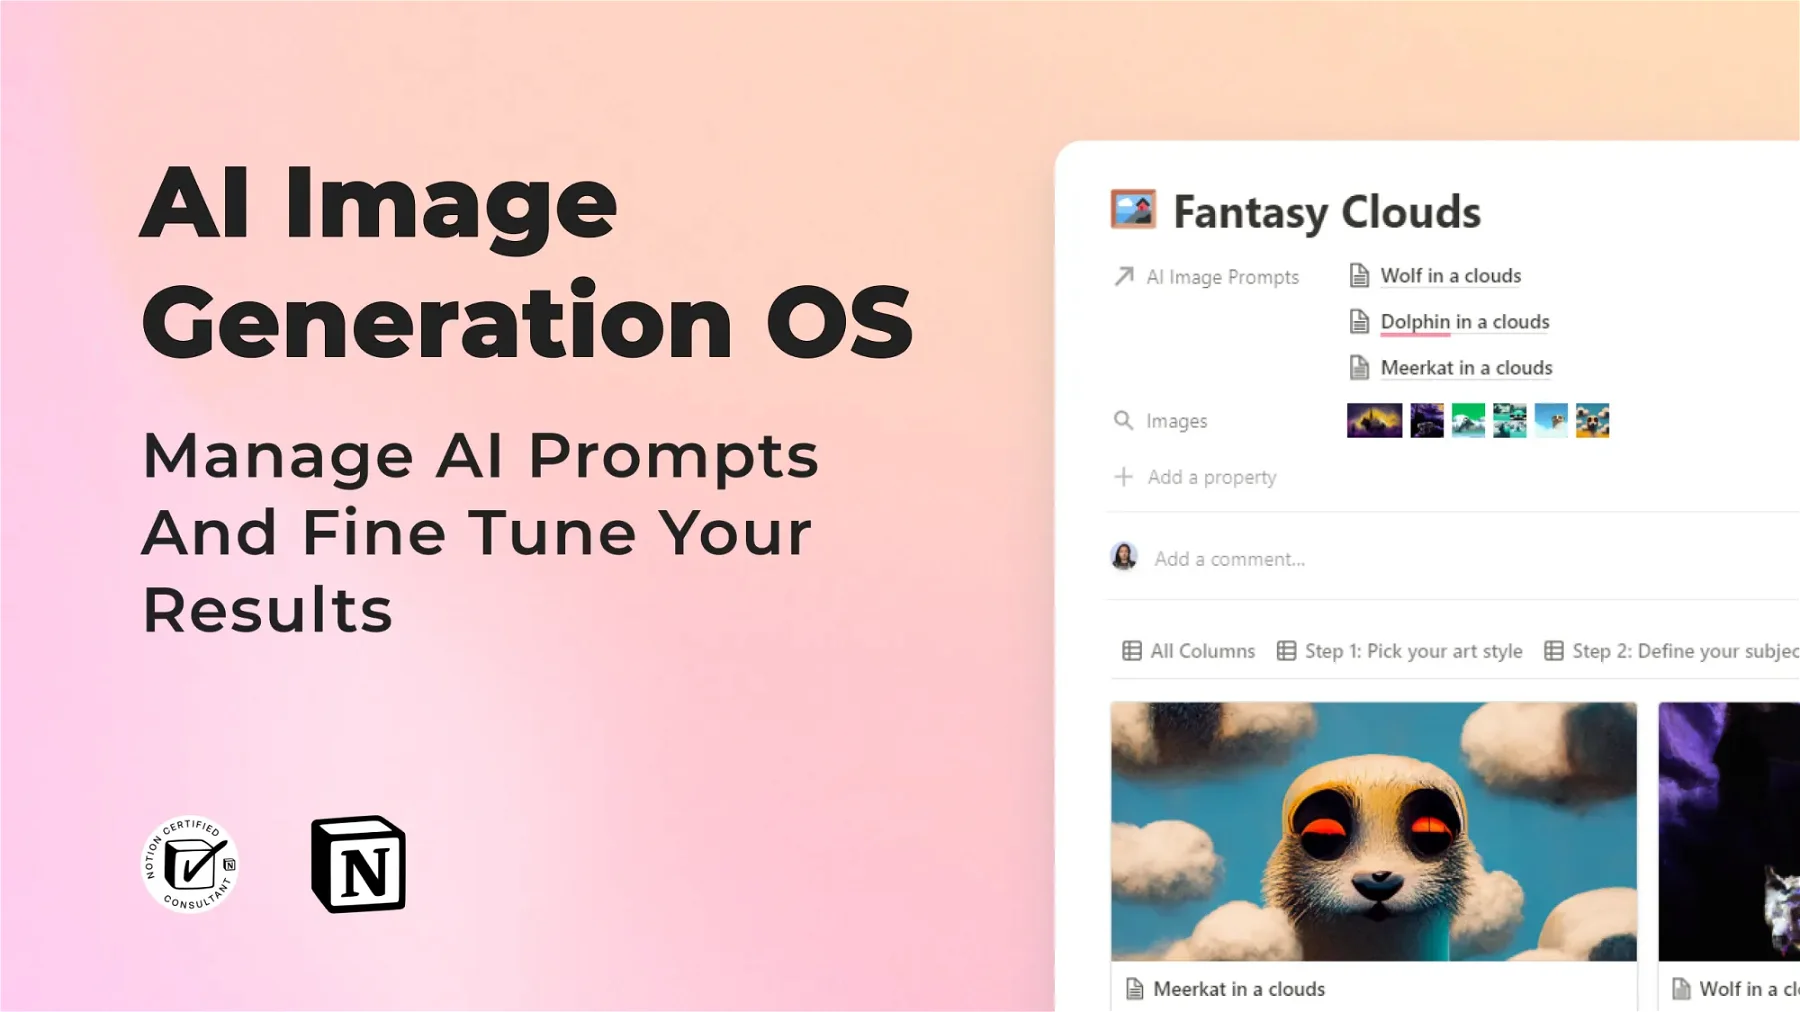 ðŸŽ¨ AI Generated Images Made Easy! - AI Image Generation OS